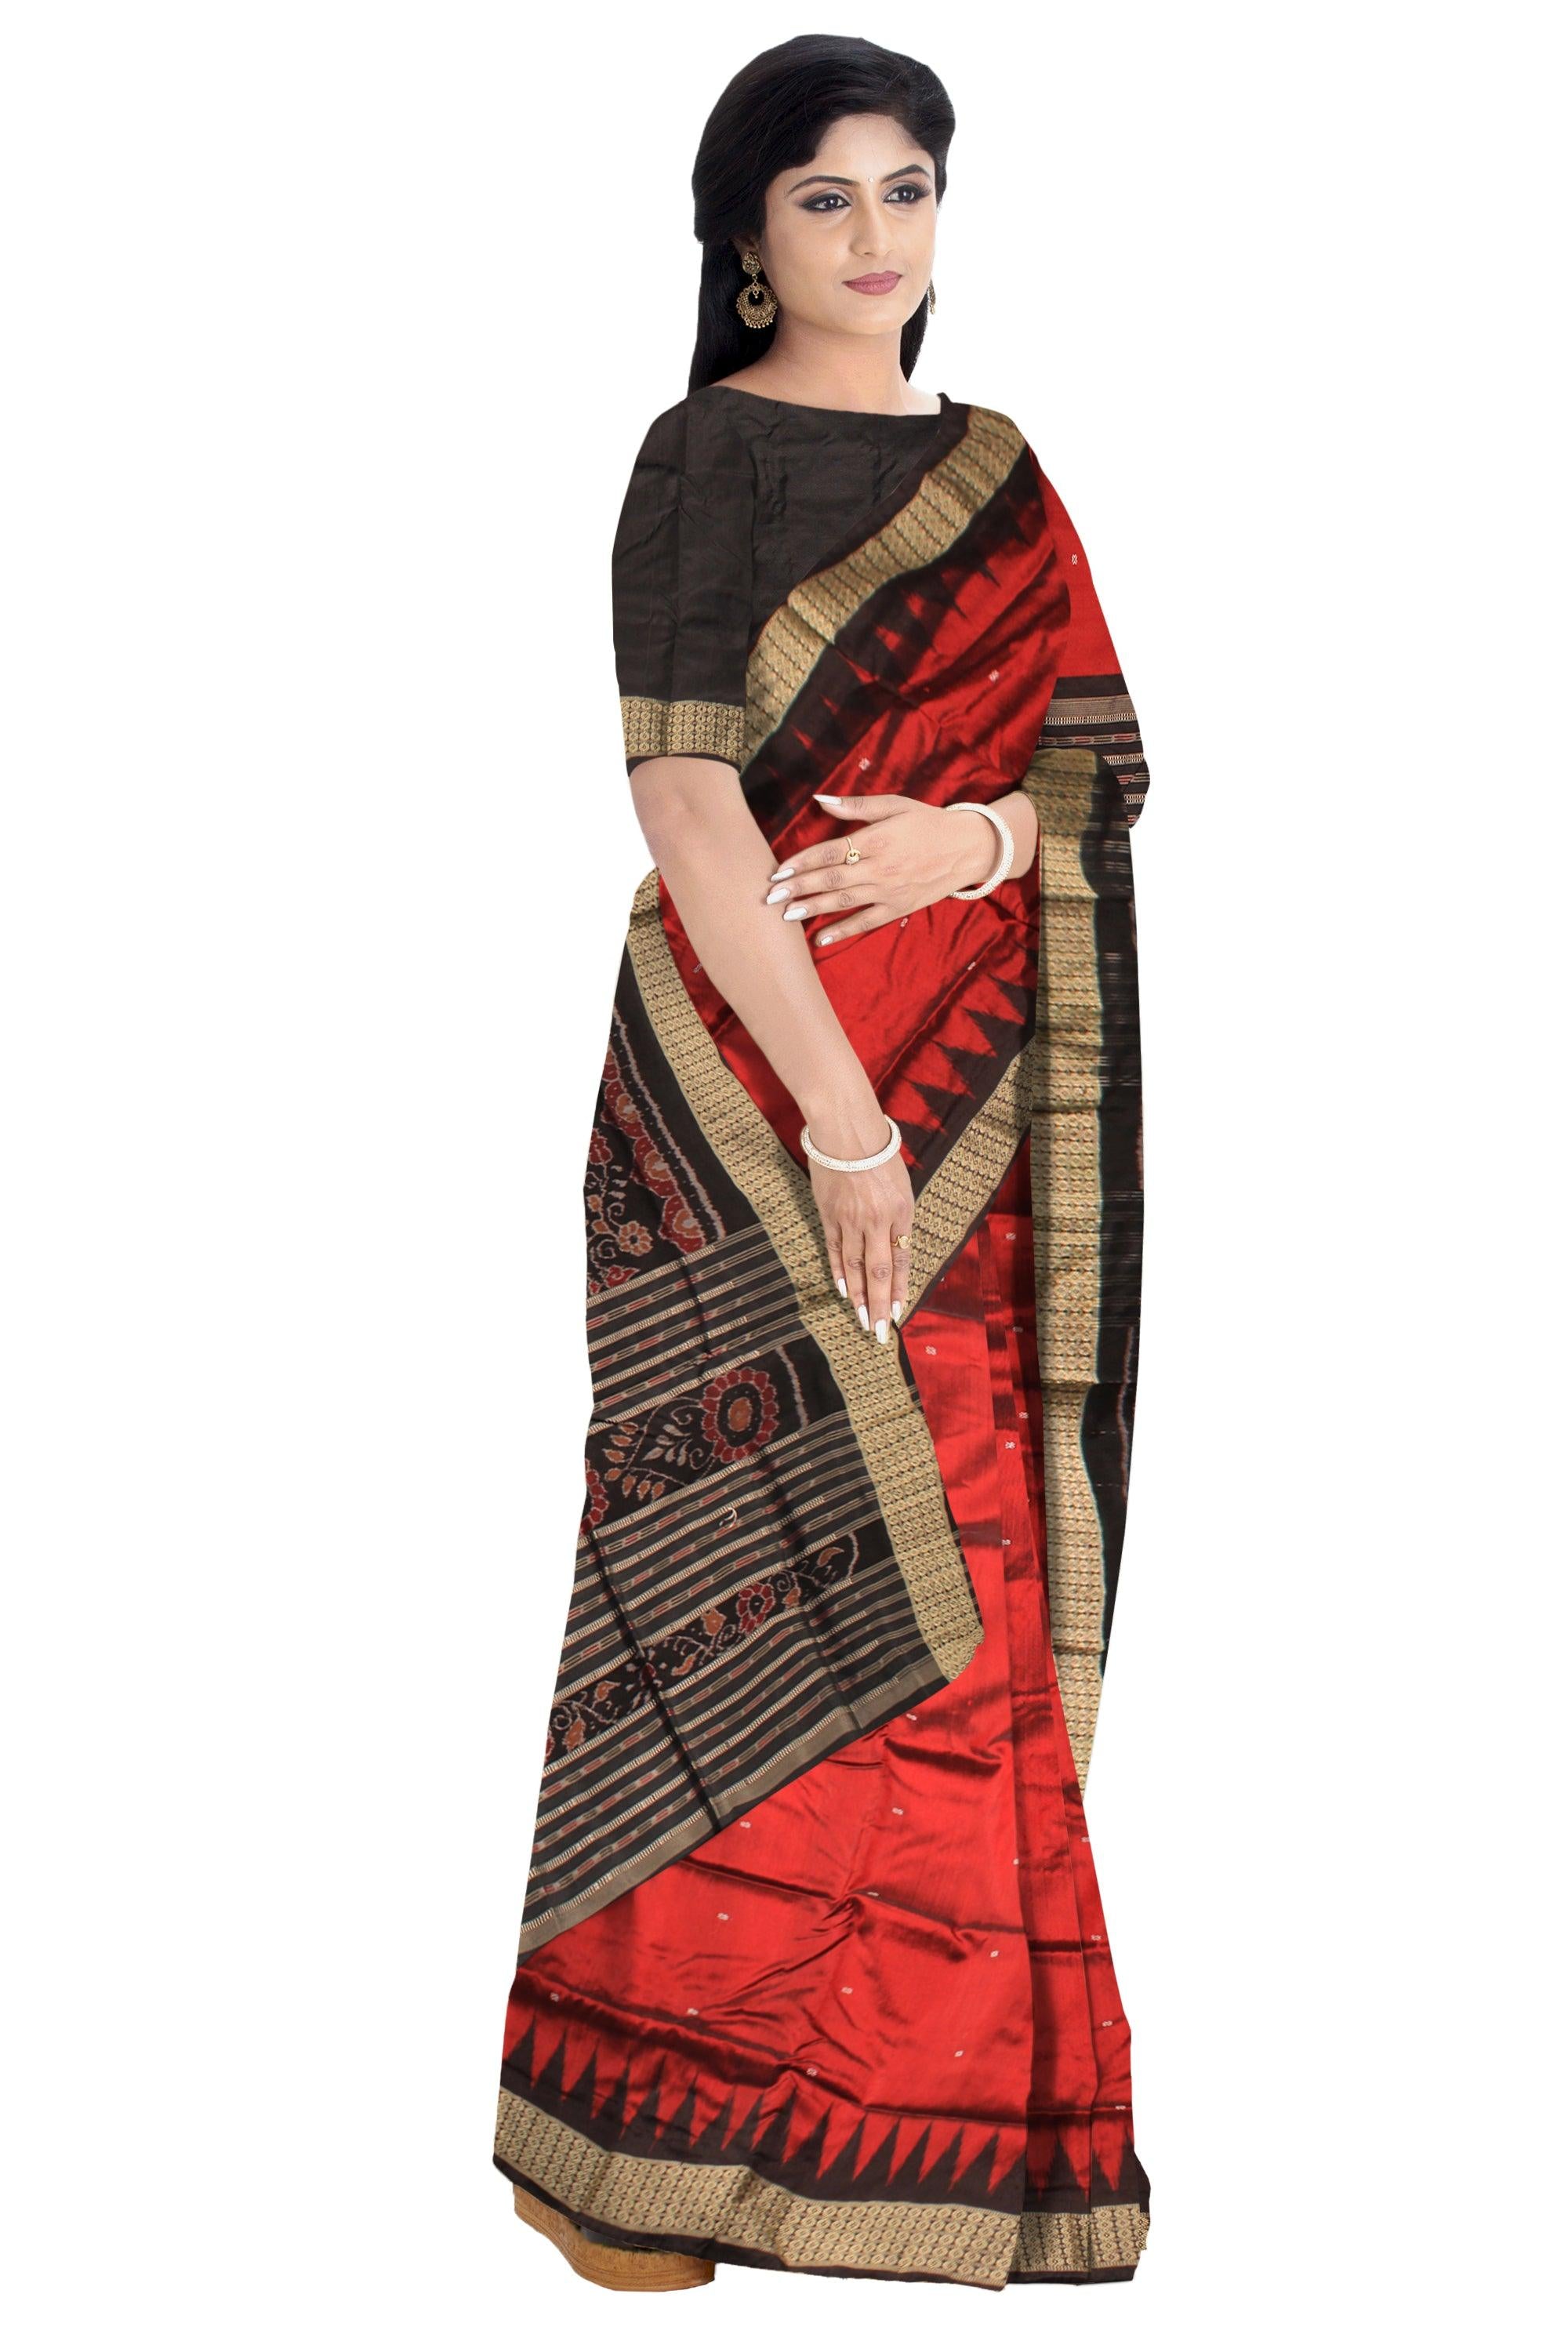 MAROON AND BLACK COLOR BOOTY PATTERN PATA SAREE, WITH BLOUSE PIECE. - Koshali Arts & Crafts Enterprise